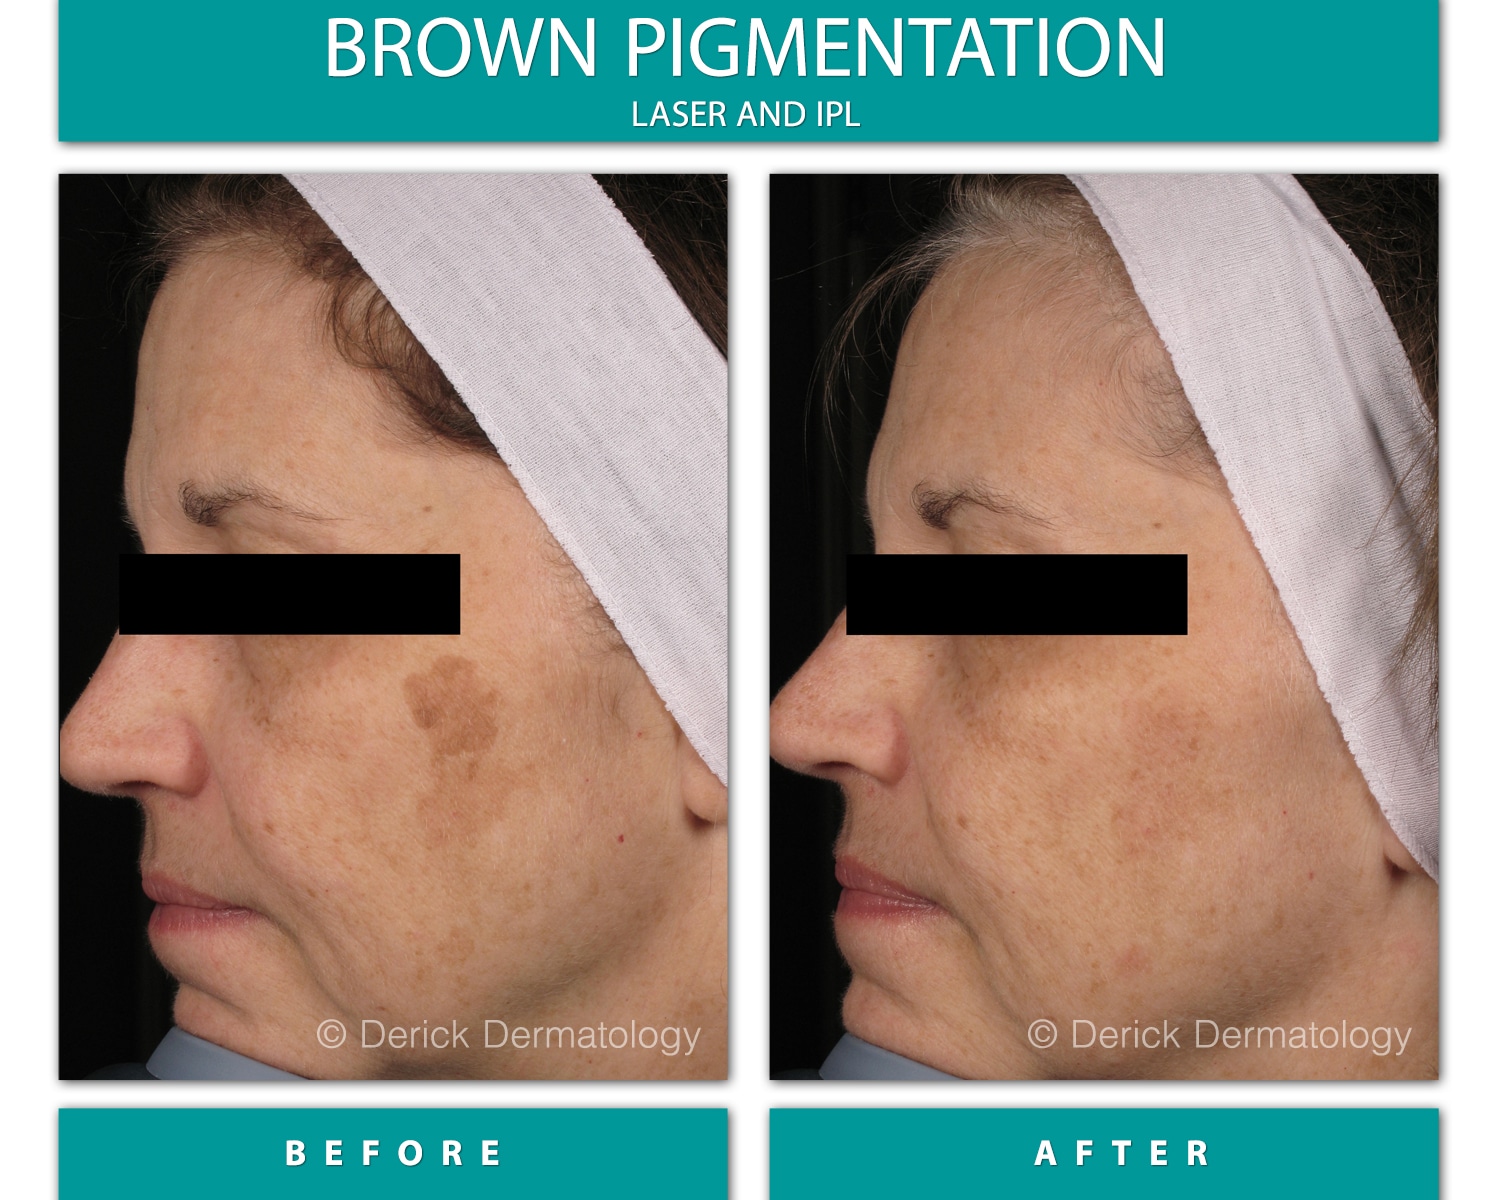 Before and After Brown Pigment Gallery - Derick Dermatology